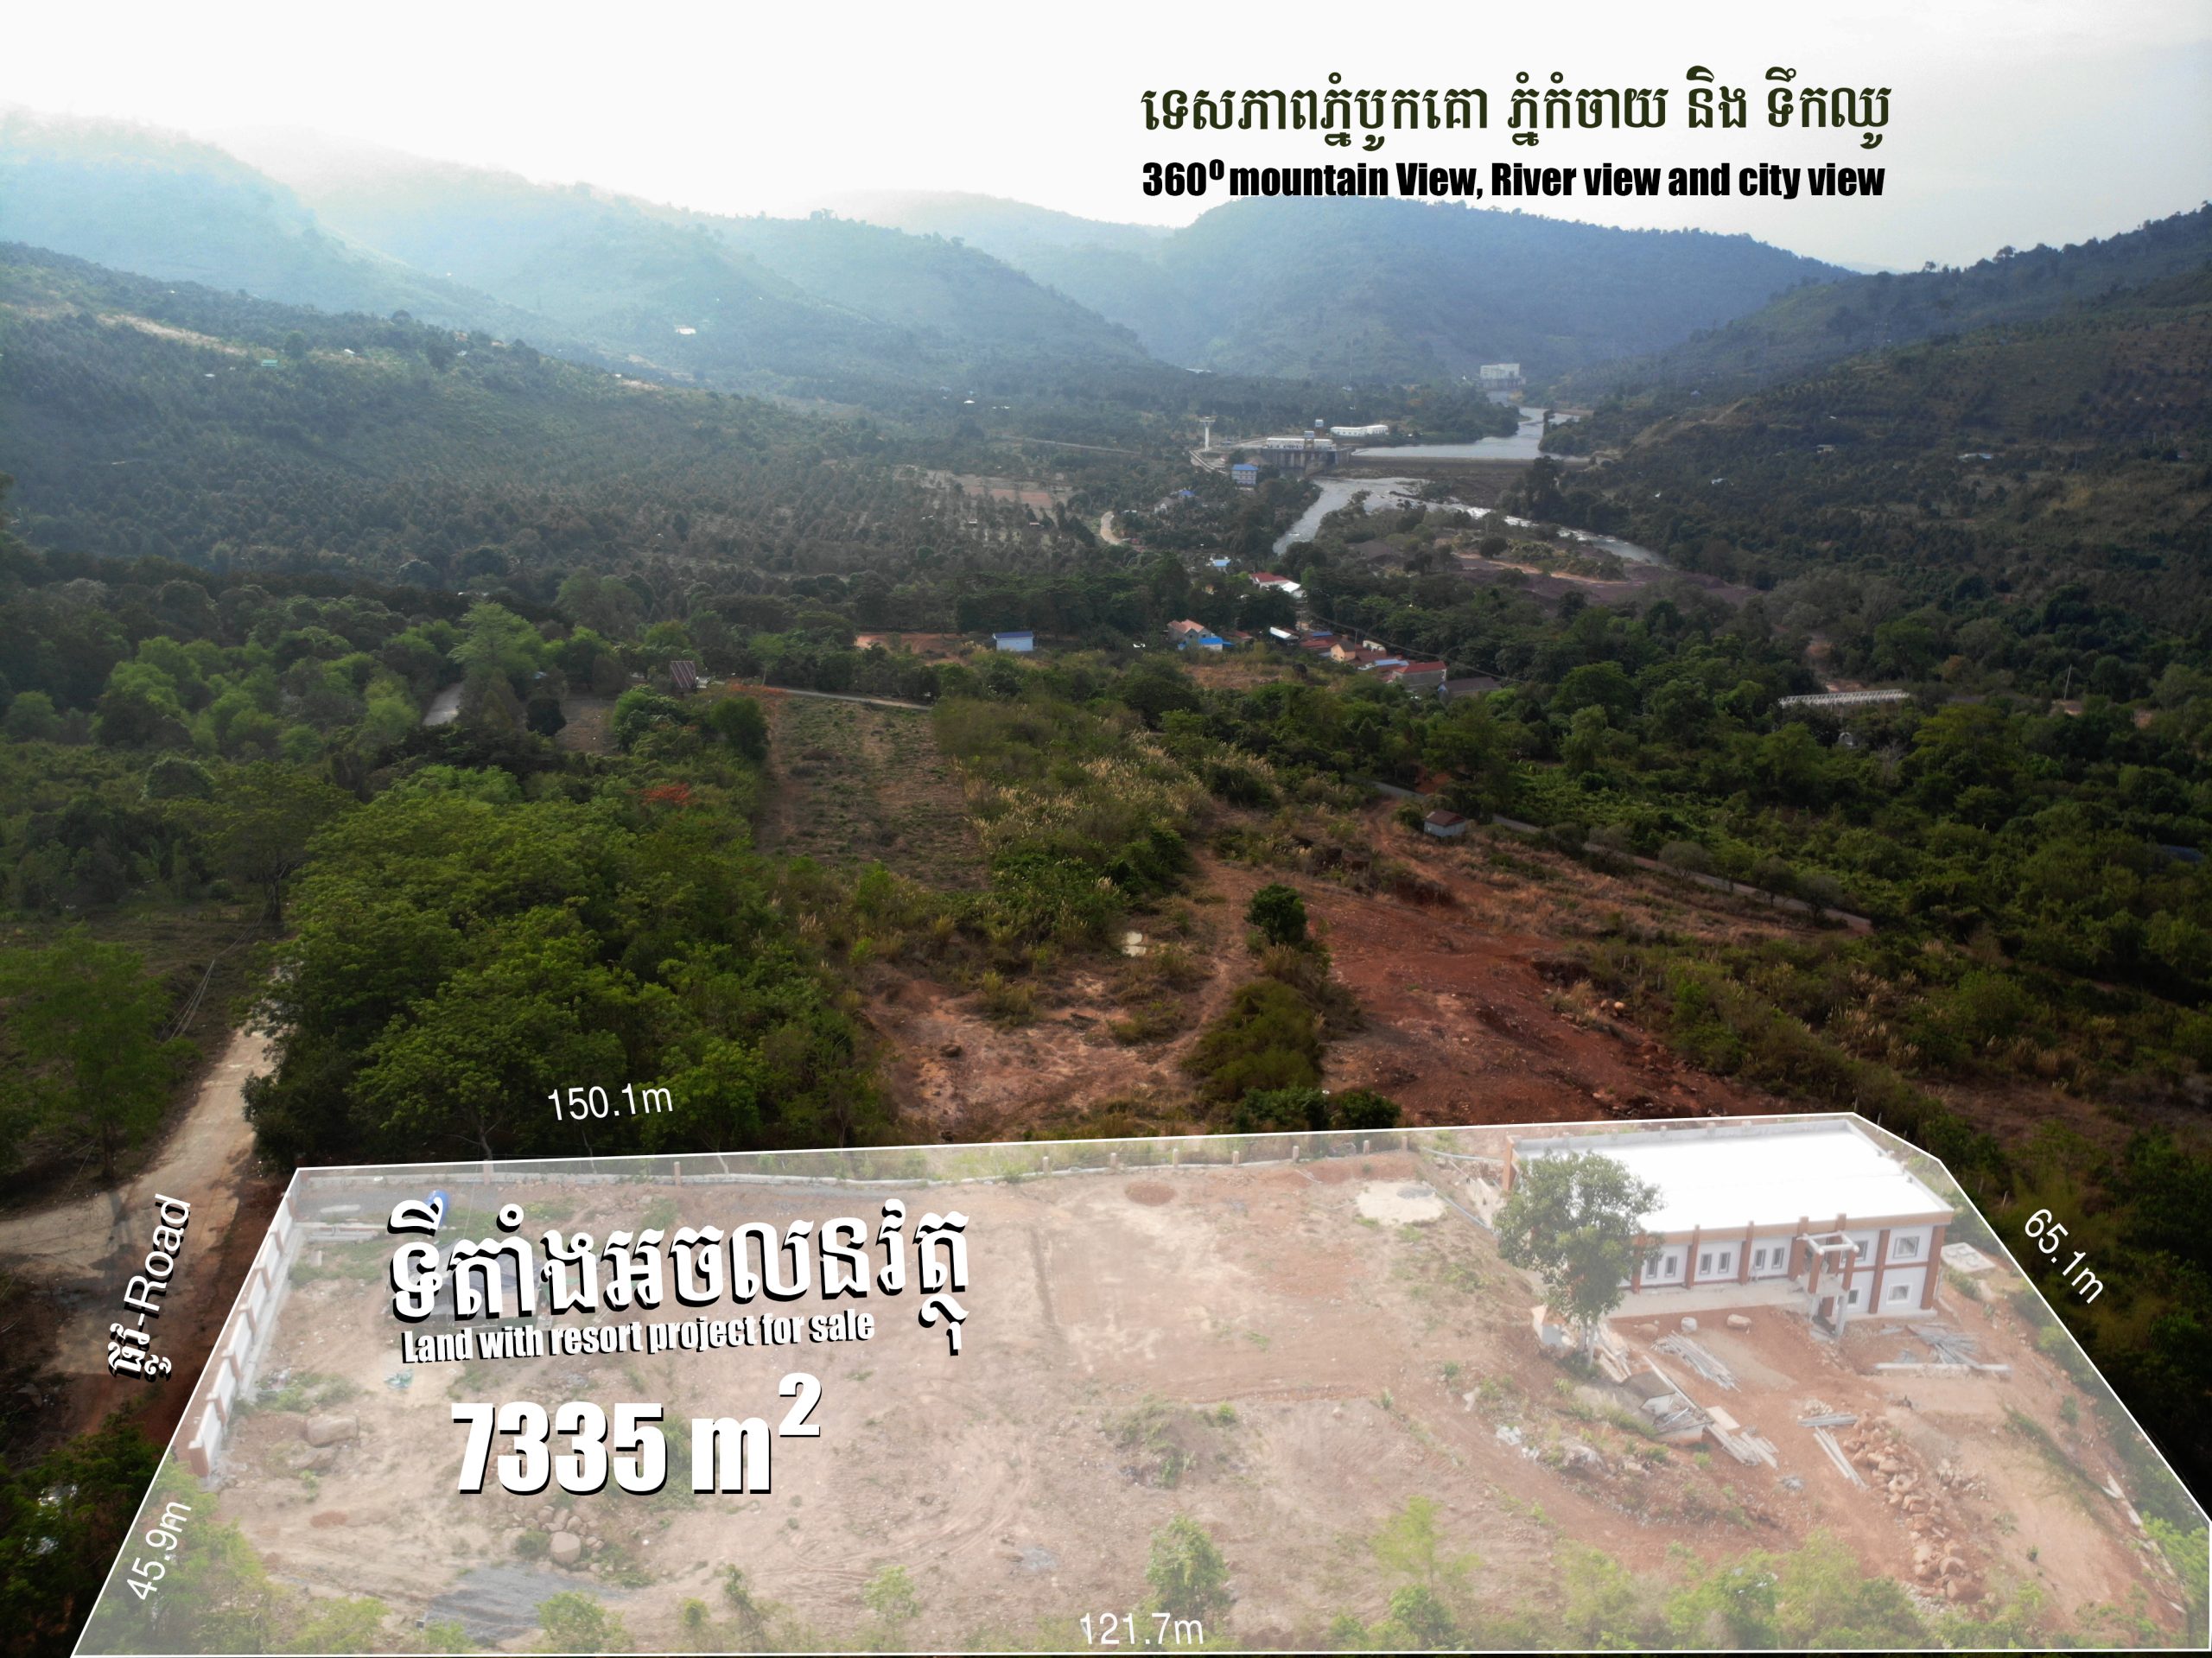 Land for sale on Top of the mountain, Kampot